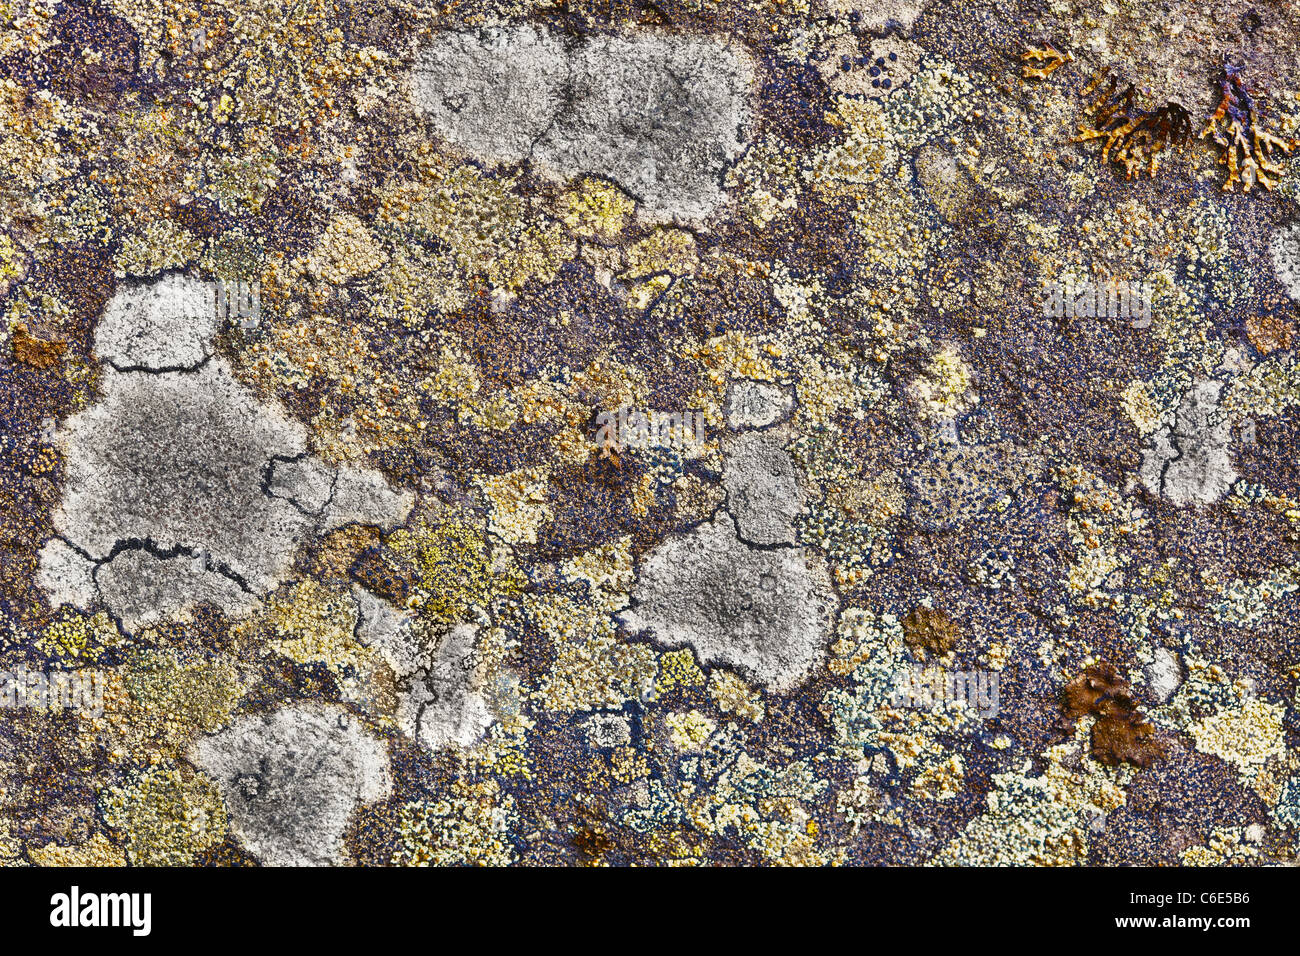 Surface of the granite rocks covered with lichen Stock Photo